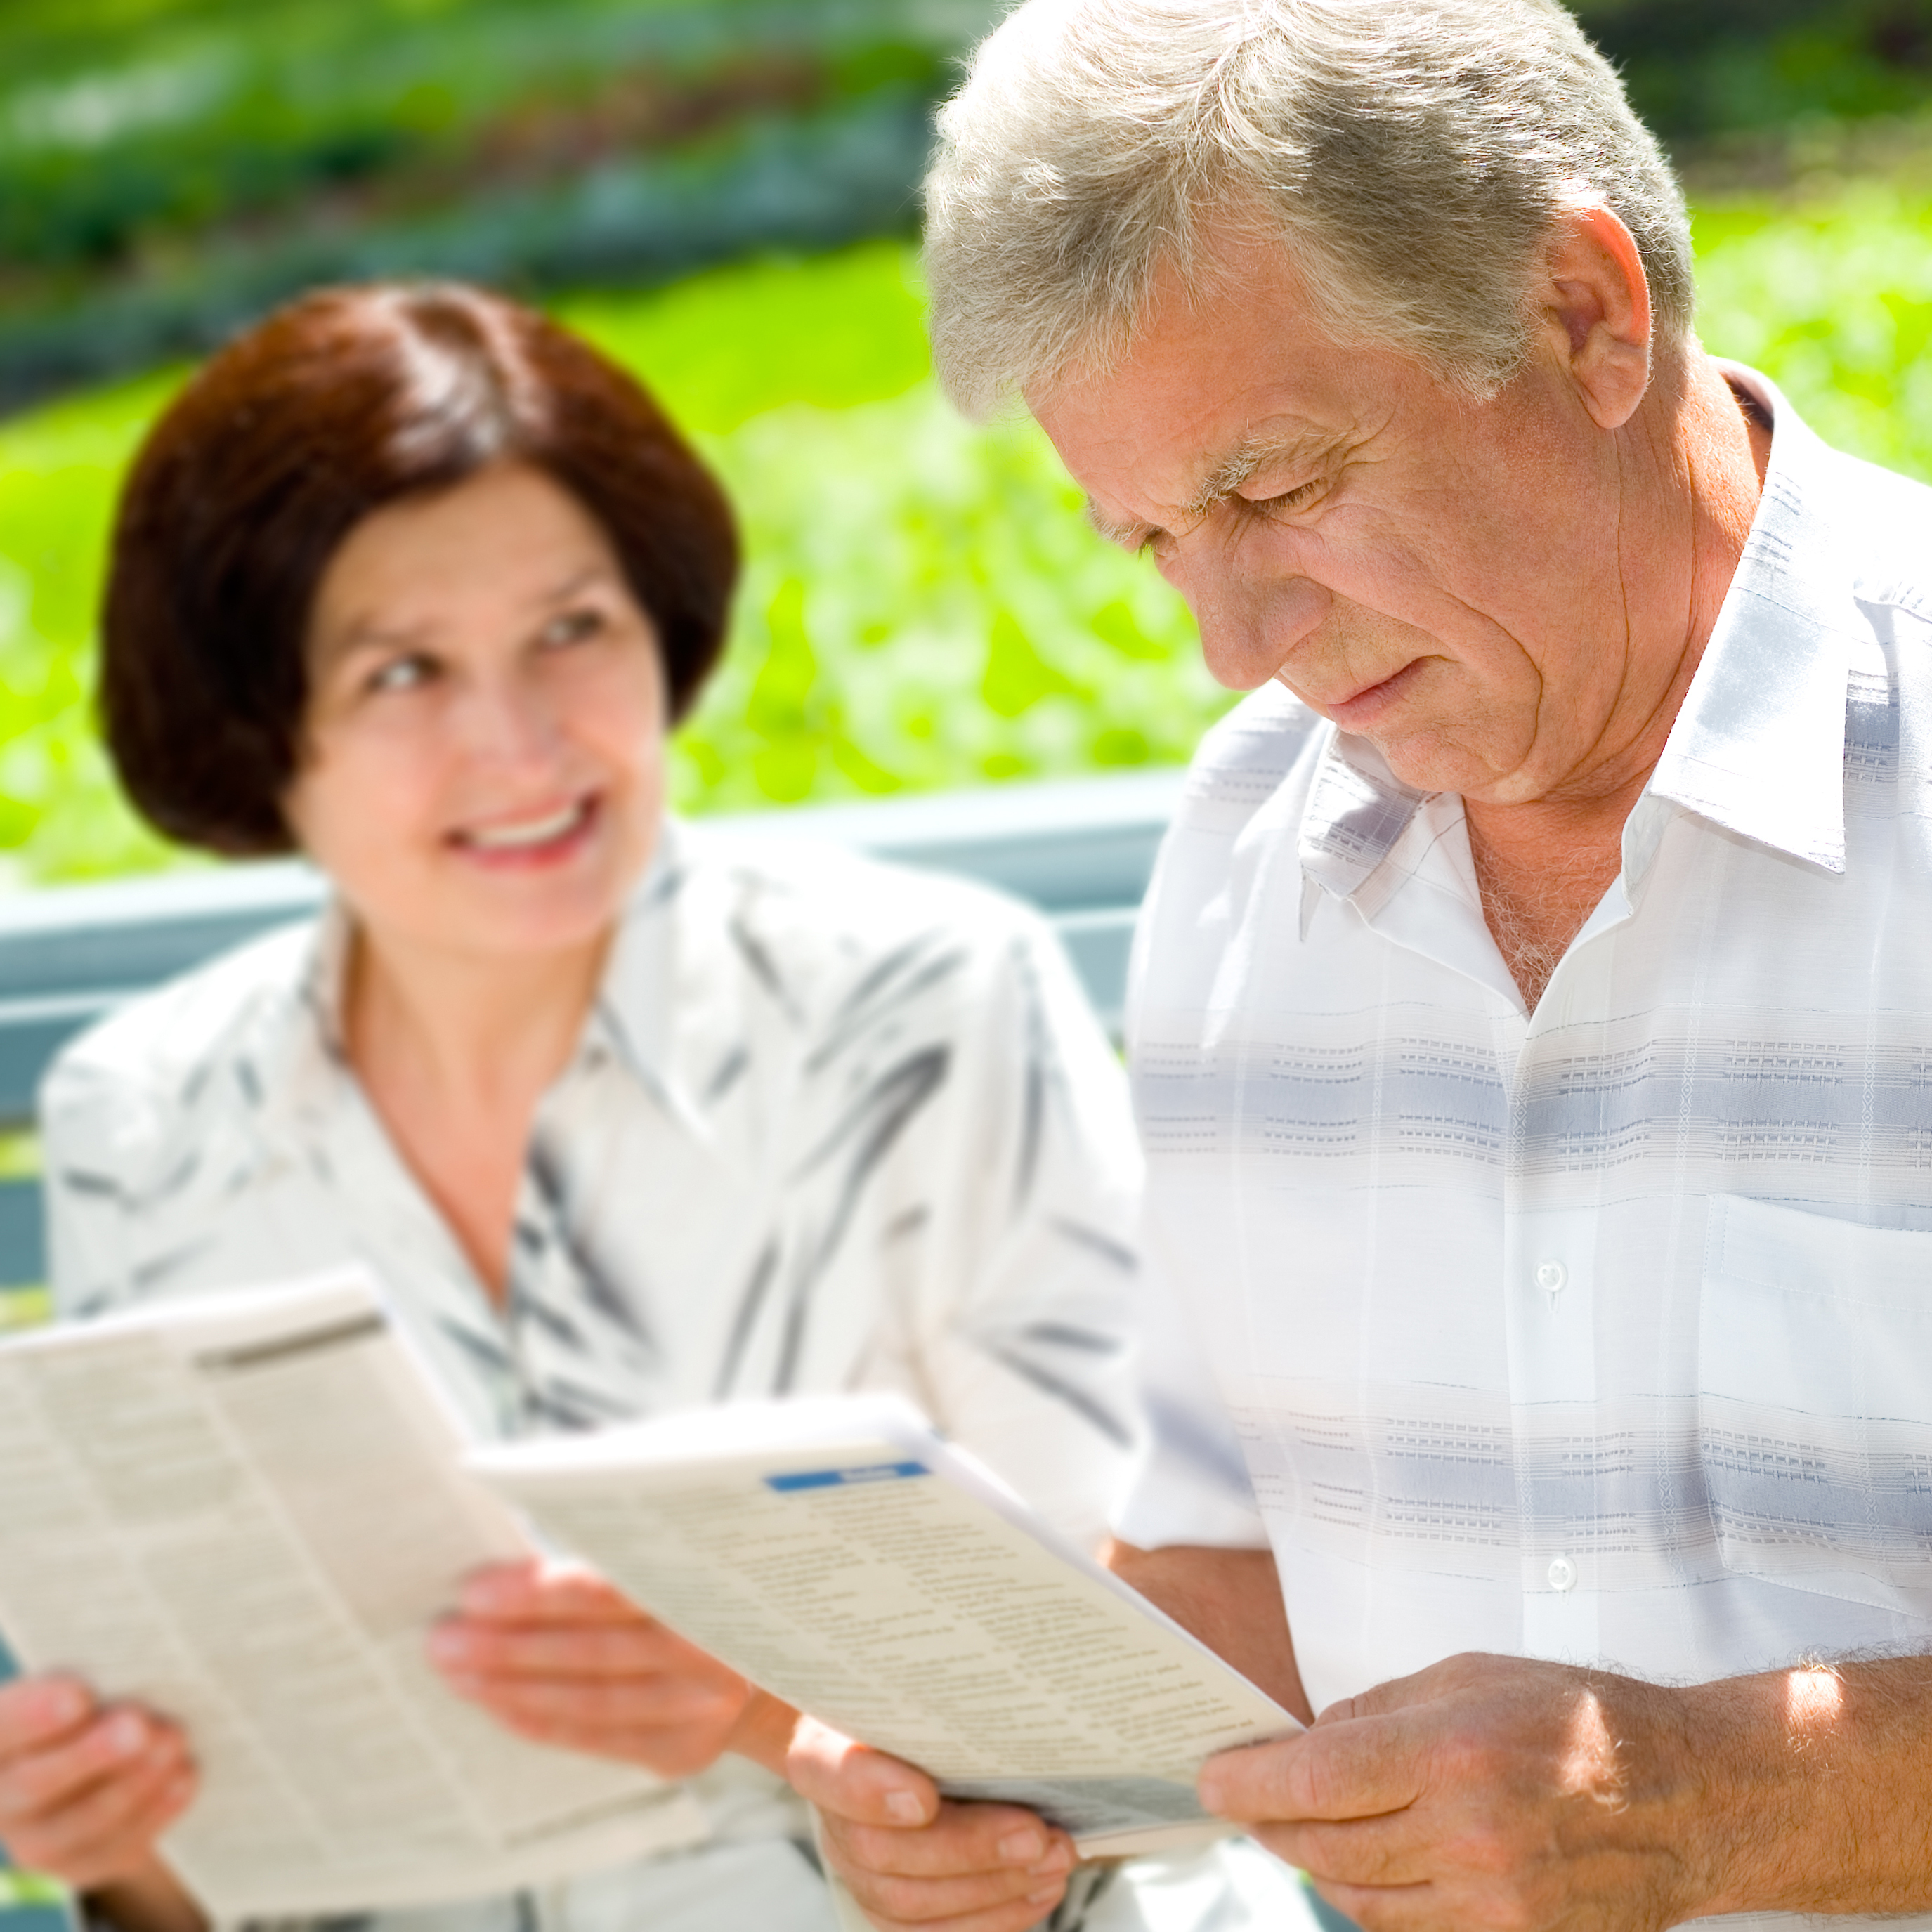 How can I minimize the need for estate probate?